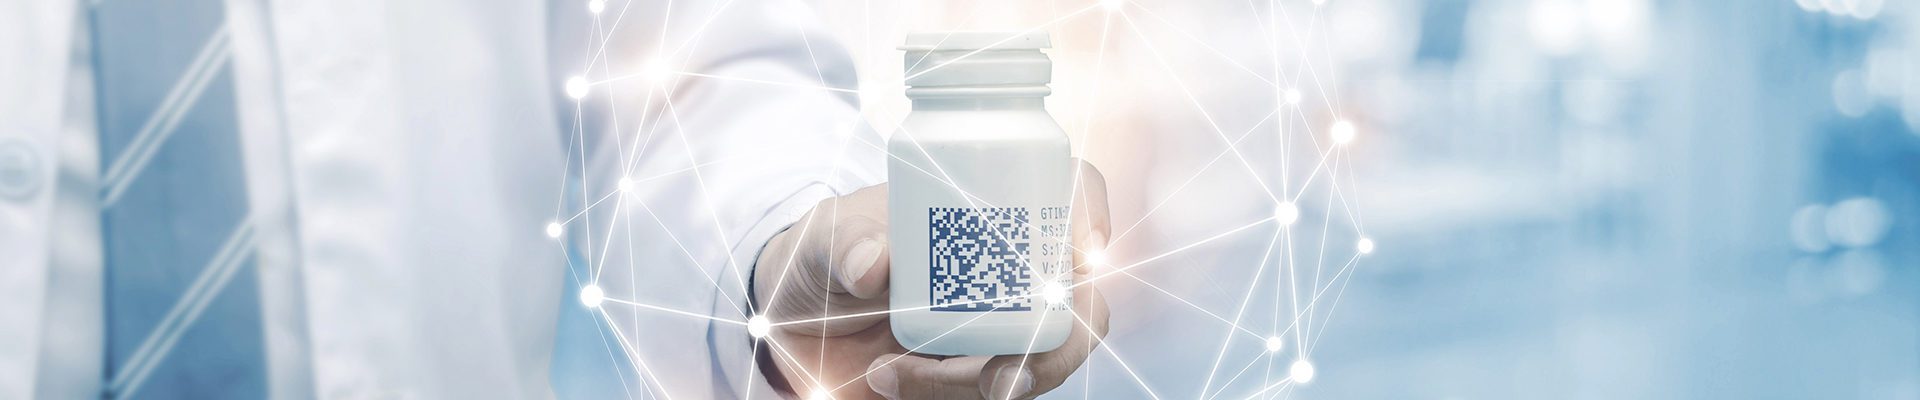 Track-and-Trace Solutions for the Pharmaceutical Industry